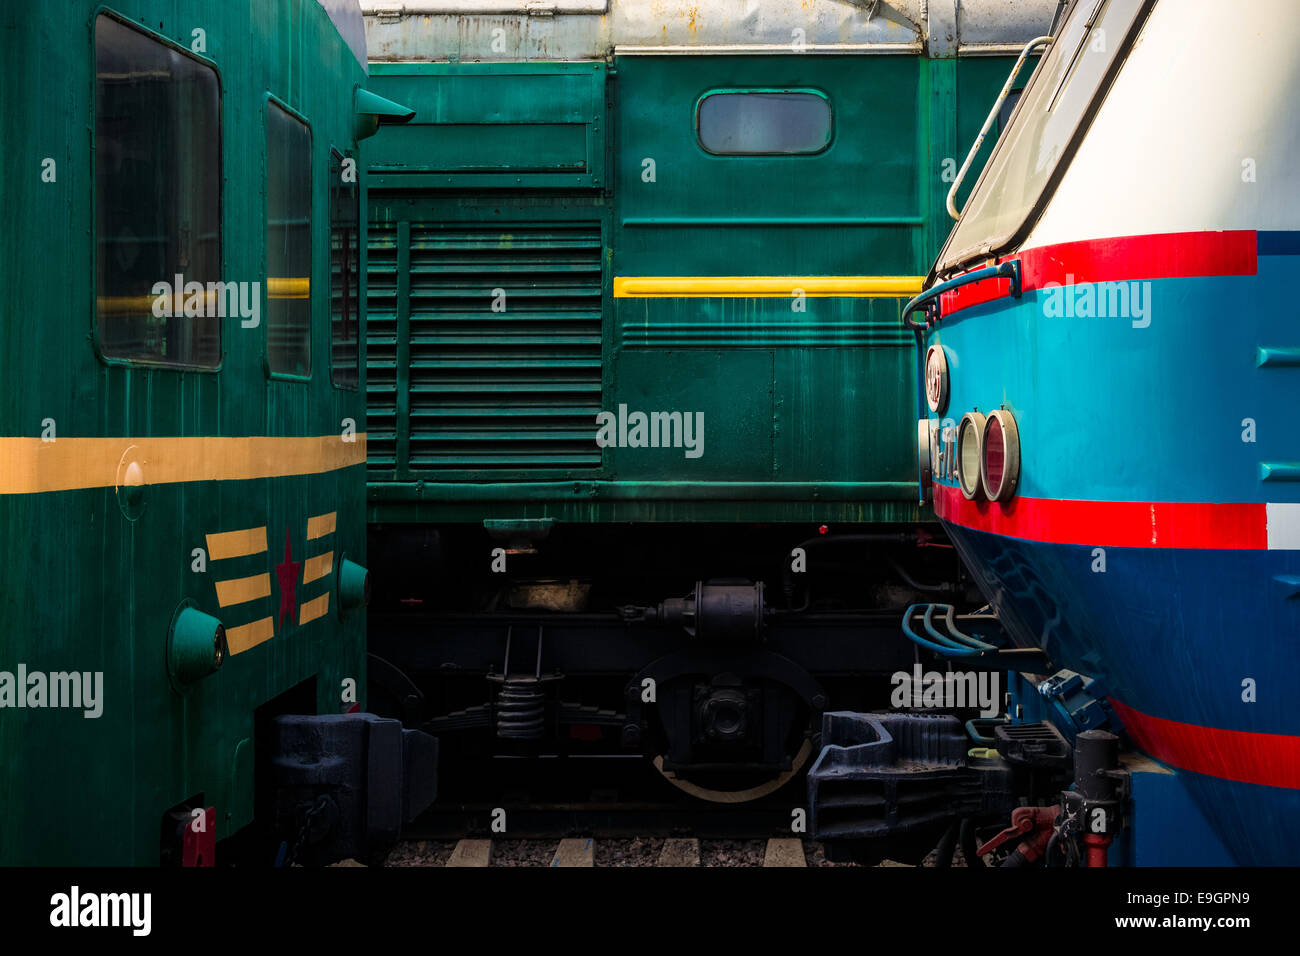 Details of electrical locomotives head to head on the rails. Play or green, red, yellow, blue and white colors Stock Photo